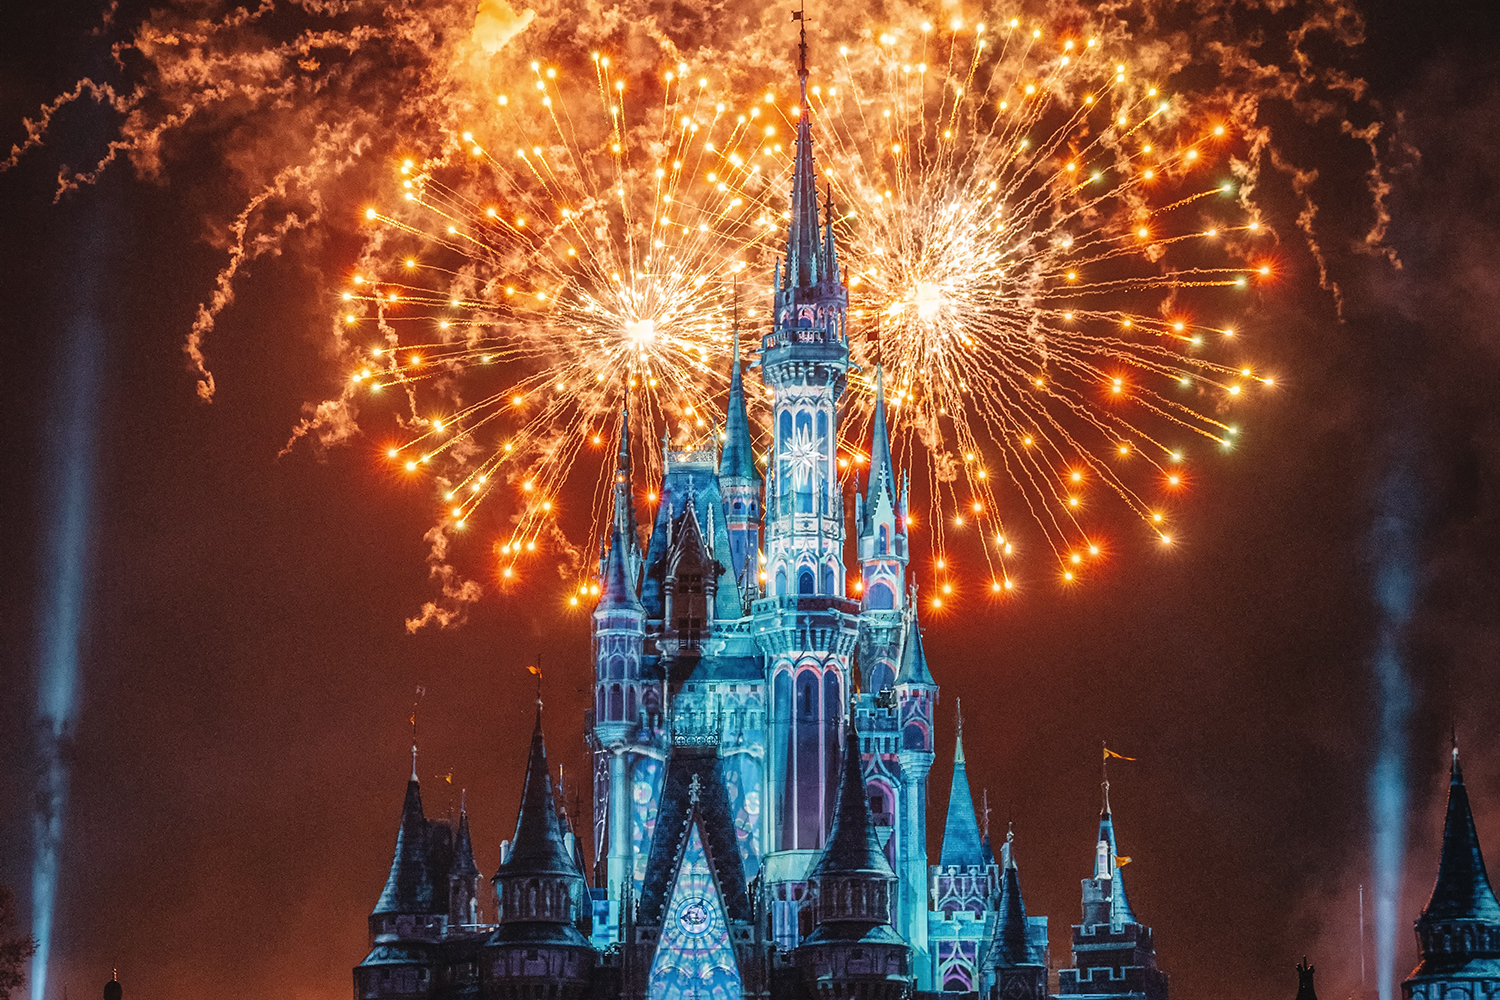 A photograph of the iconic Disney castle against an explosion of orange fireworks